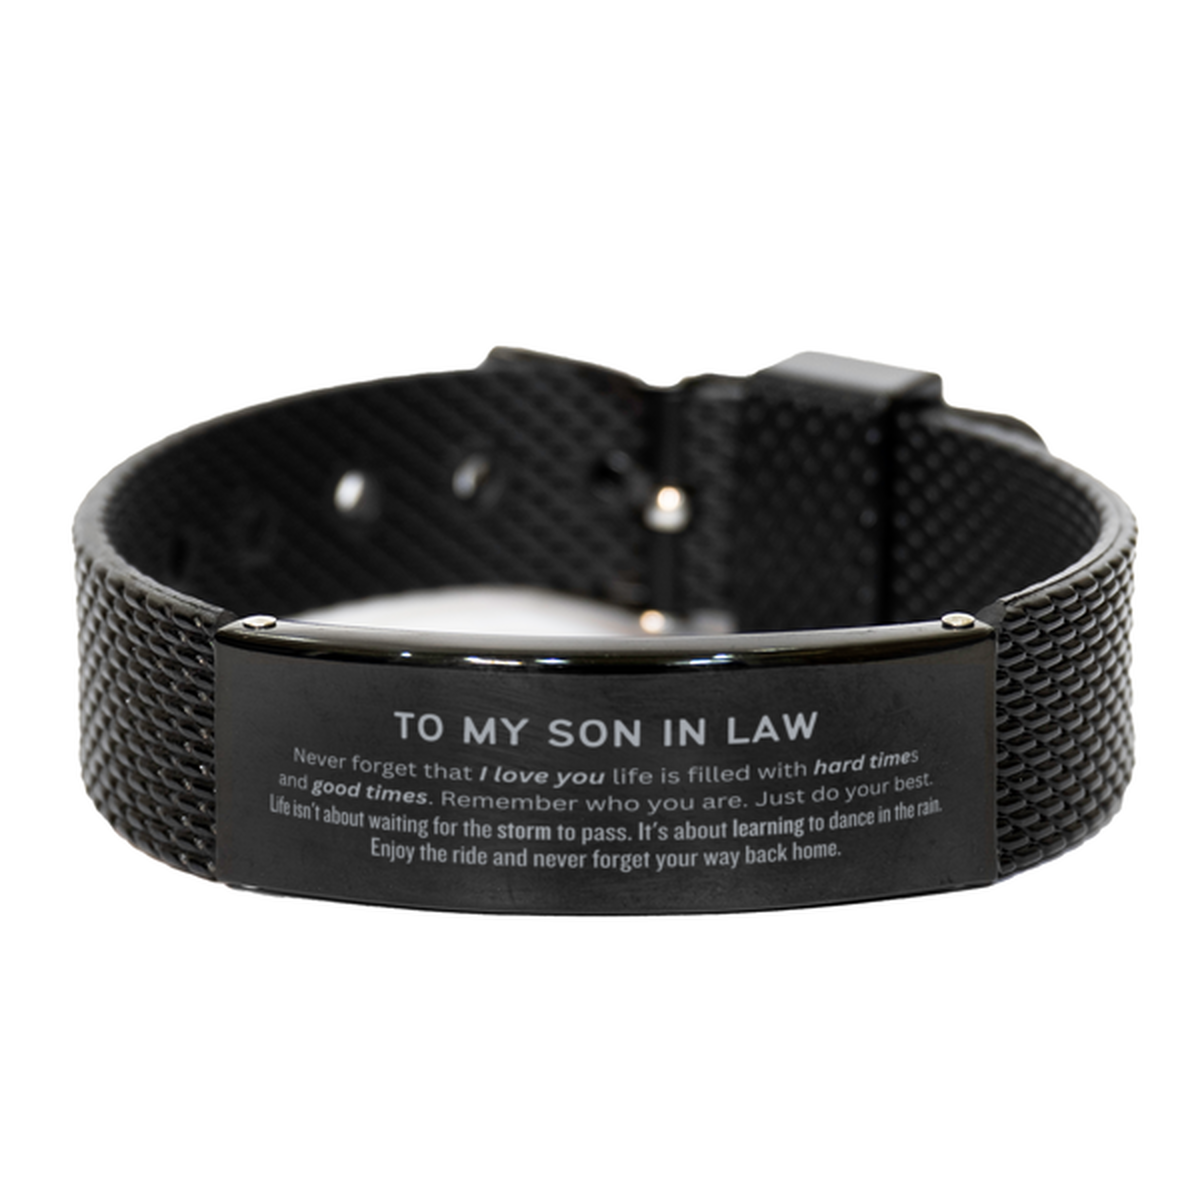 Christmas Son In Law Black Shark Mesh Bracelet Gifts, To My Son In Law Birthday Thank You Gifts For Son In Law, Graduation Unique Gifts For Son In Law To My Son In Law Never forget that I love you life is filled with hard times and good times. Remember wh